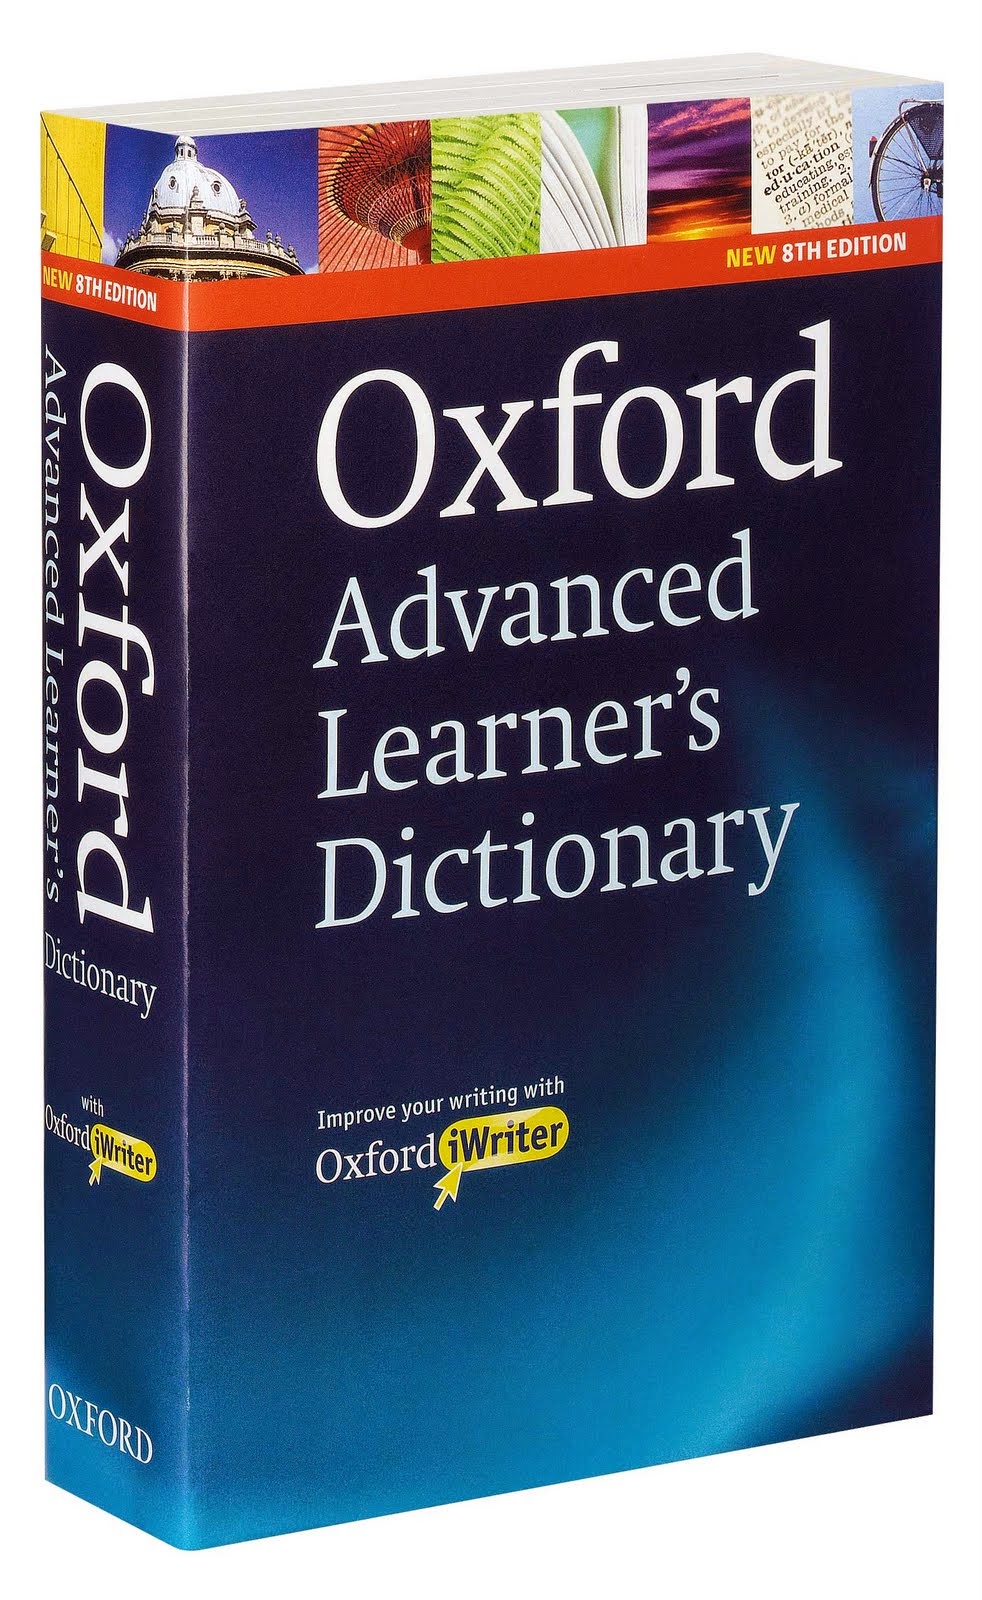 Download and setup Oxford Advanced Learner's Dictionary ...